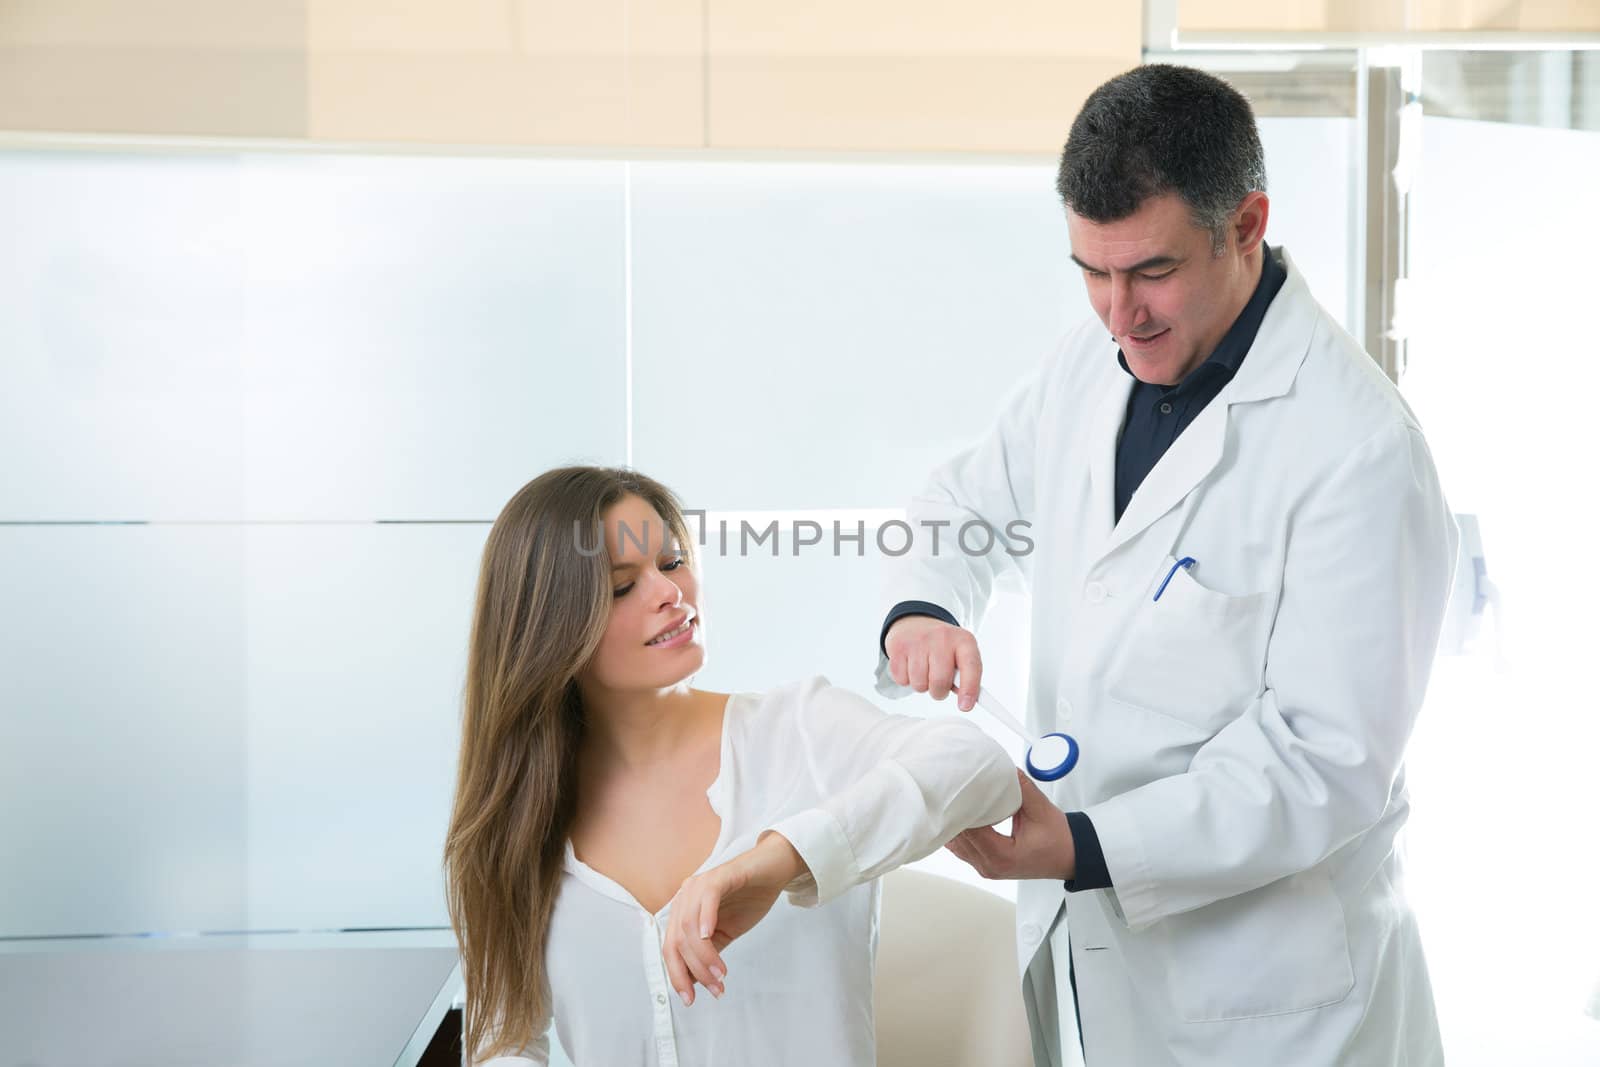 Doctor checking elbow with reflex round hammer to woman patient in hospital